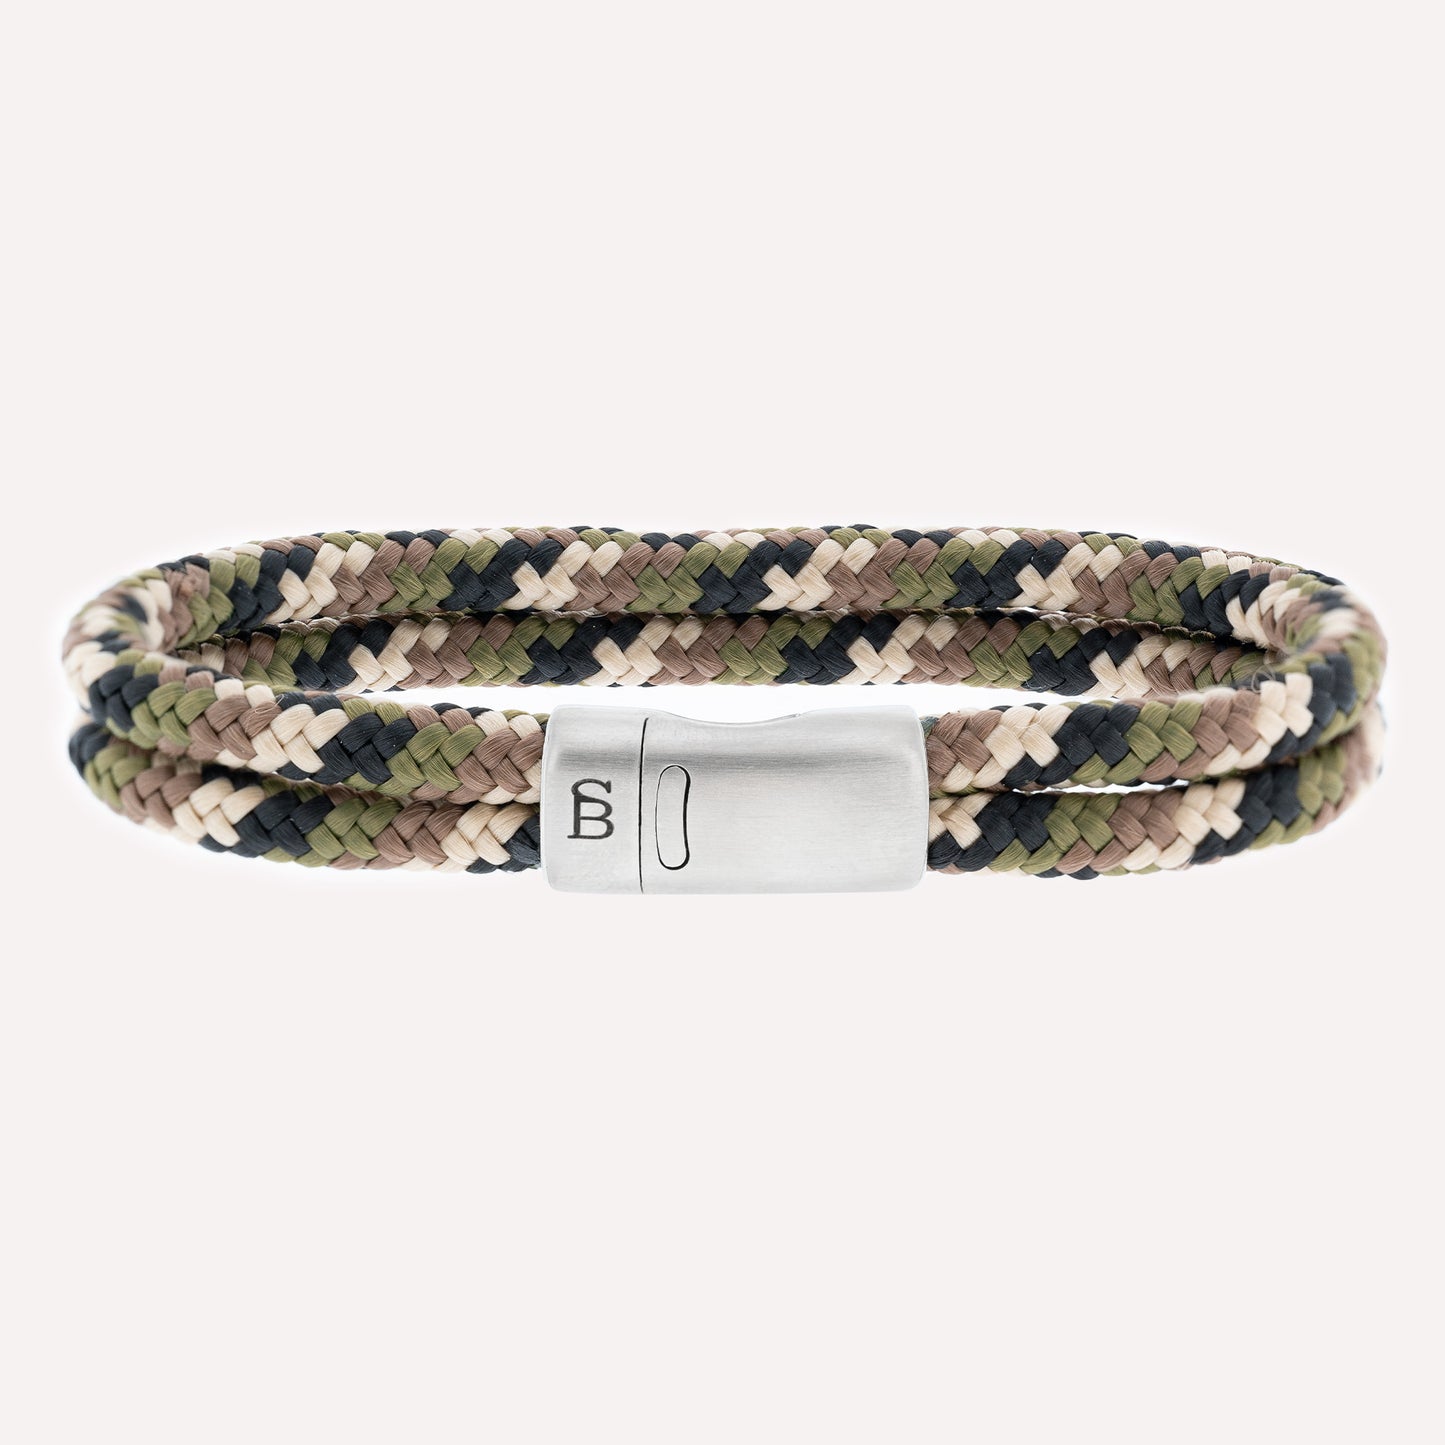 Double rope bracelet, camouflage, green and brown, stainless steel clasp, steel and barnett